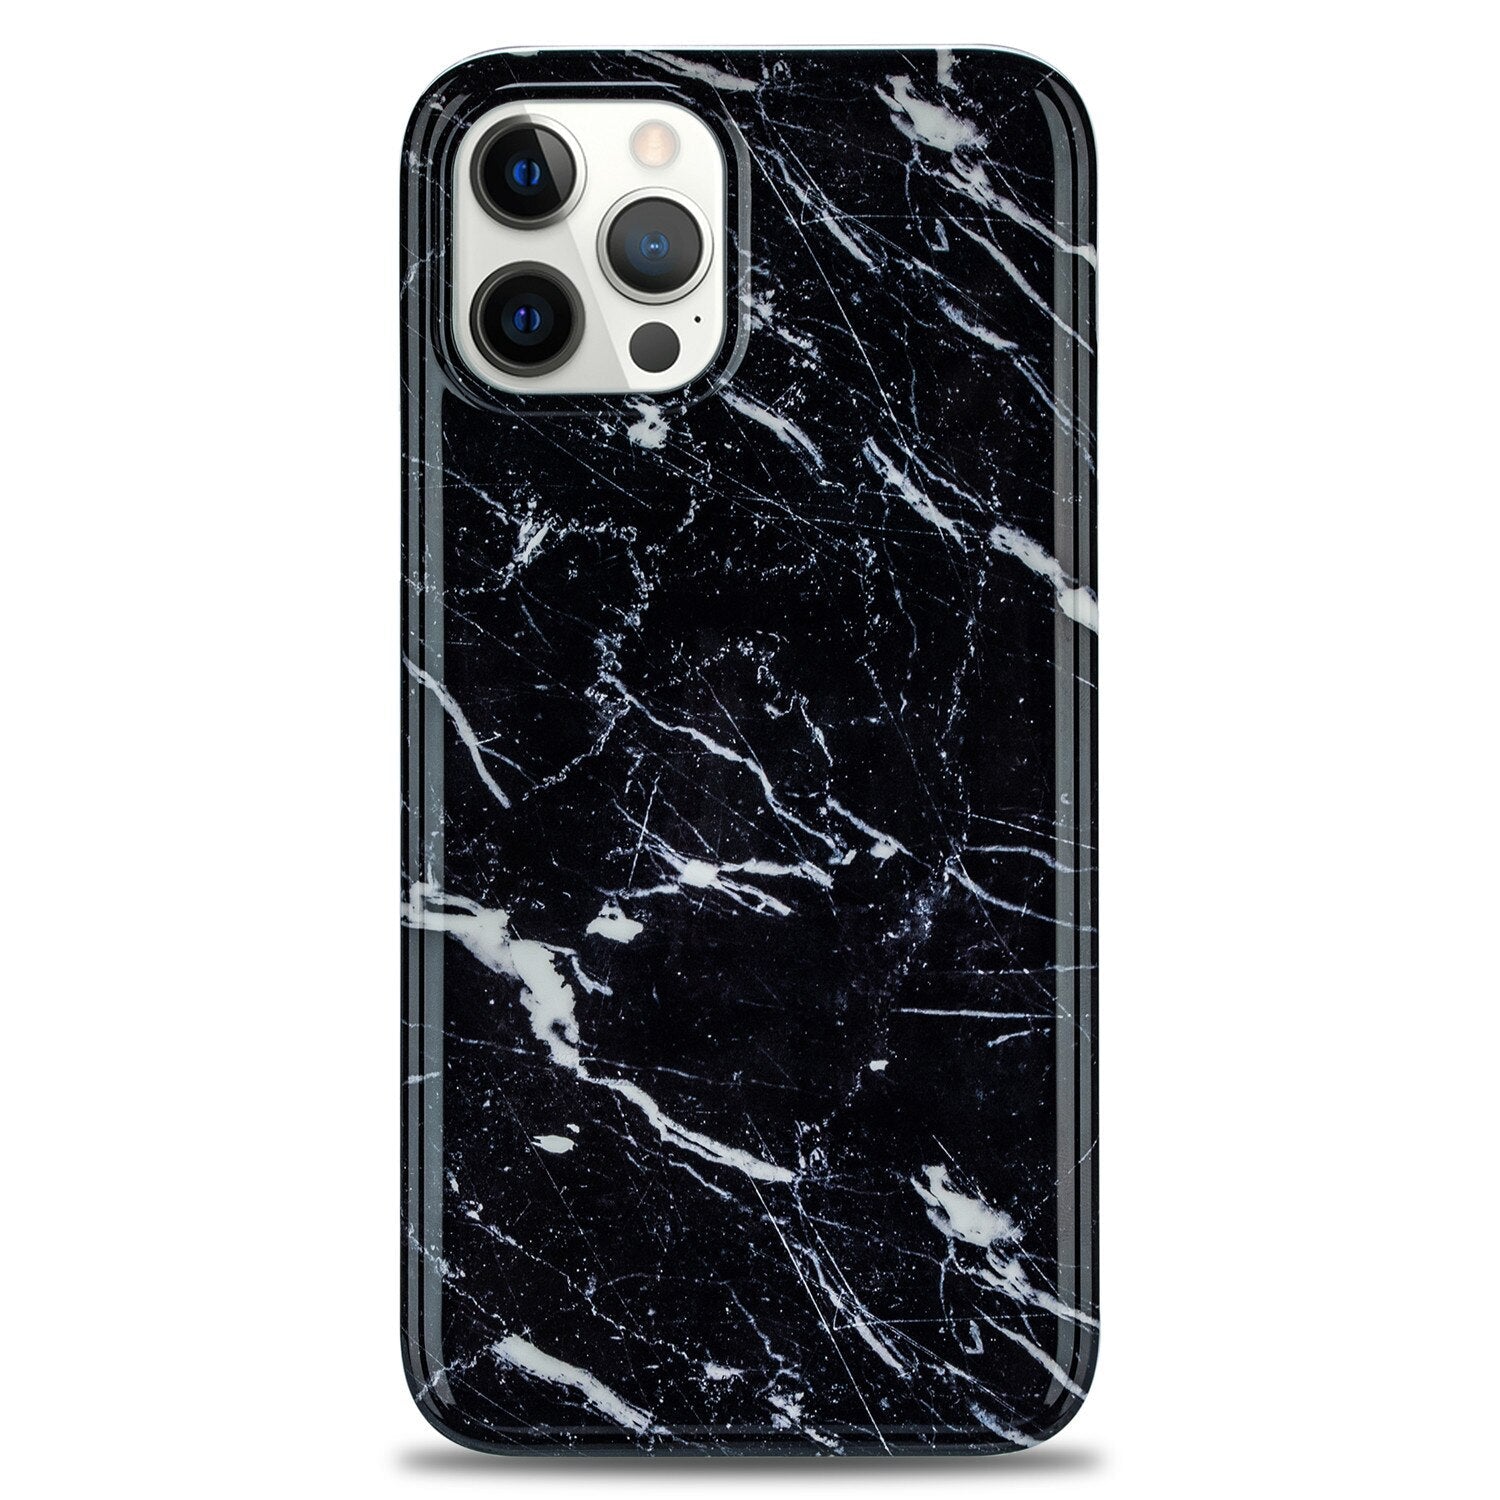 Slim Thin Marble Phone Case For IPhone 12 Mini 12 11 Pro Max Xs Max Bling Glitter Glossy Soft TPU Rubber Cover